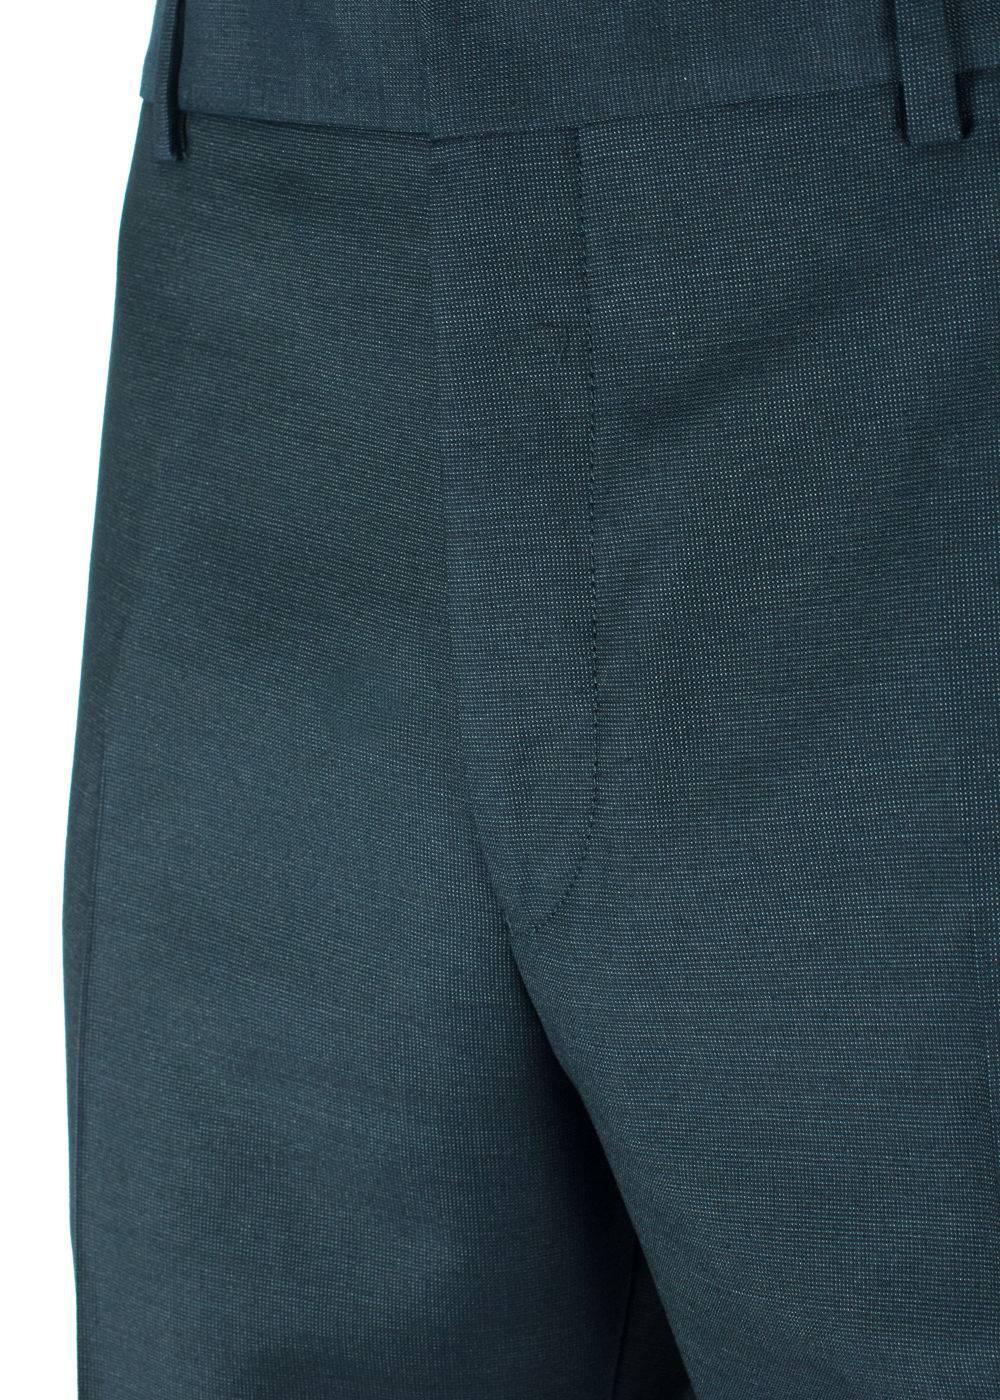 Black Givenchy Men's Classic 100% Wool Navy Trousers  For Sale